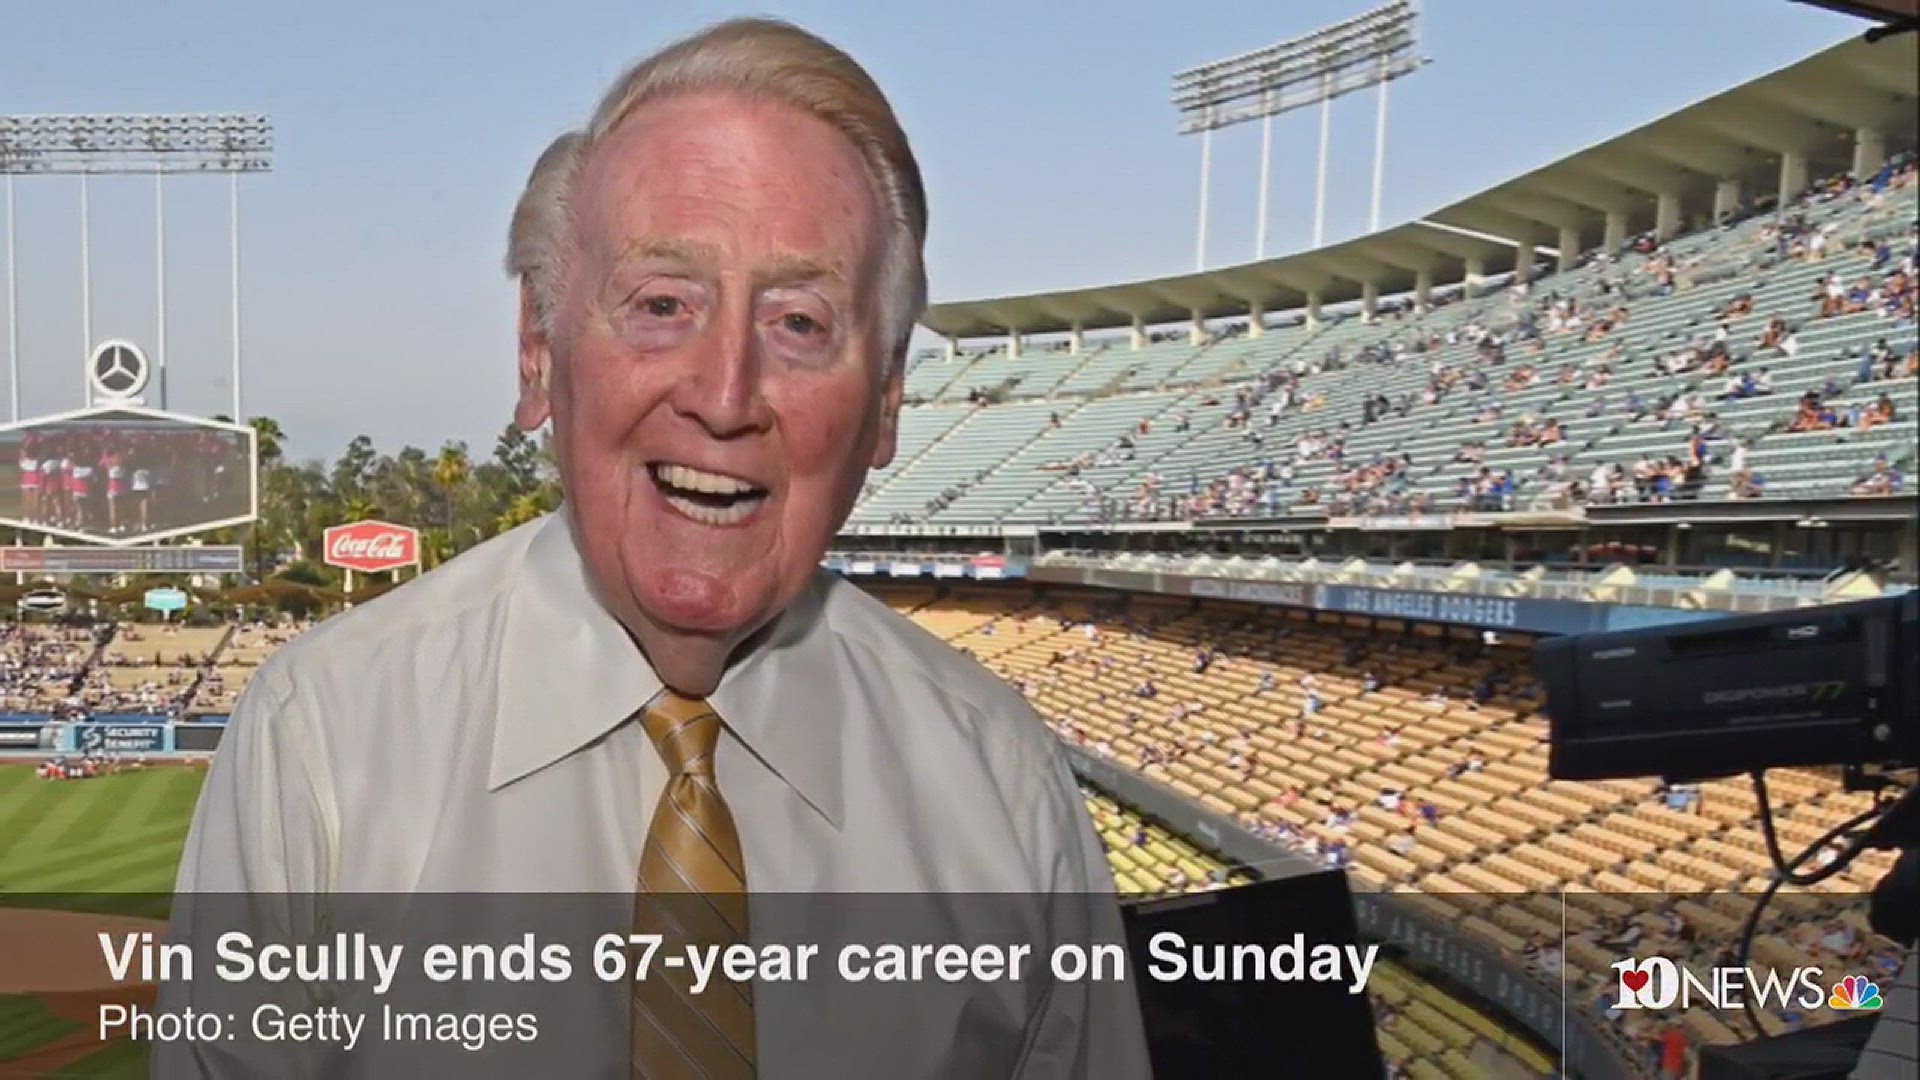 Los Angeles Dodgers announcer Vin Scully is set to announce the final game of his 67-year career on Sunday afternoon.